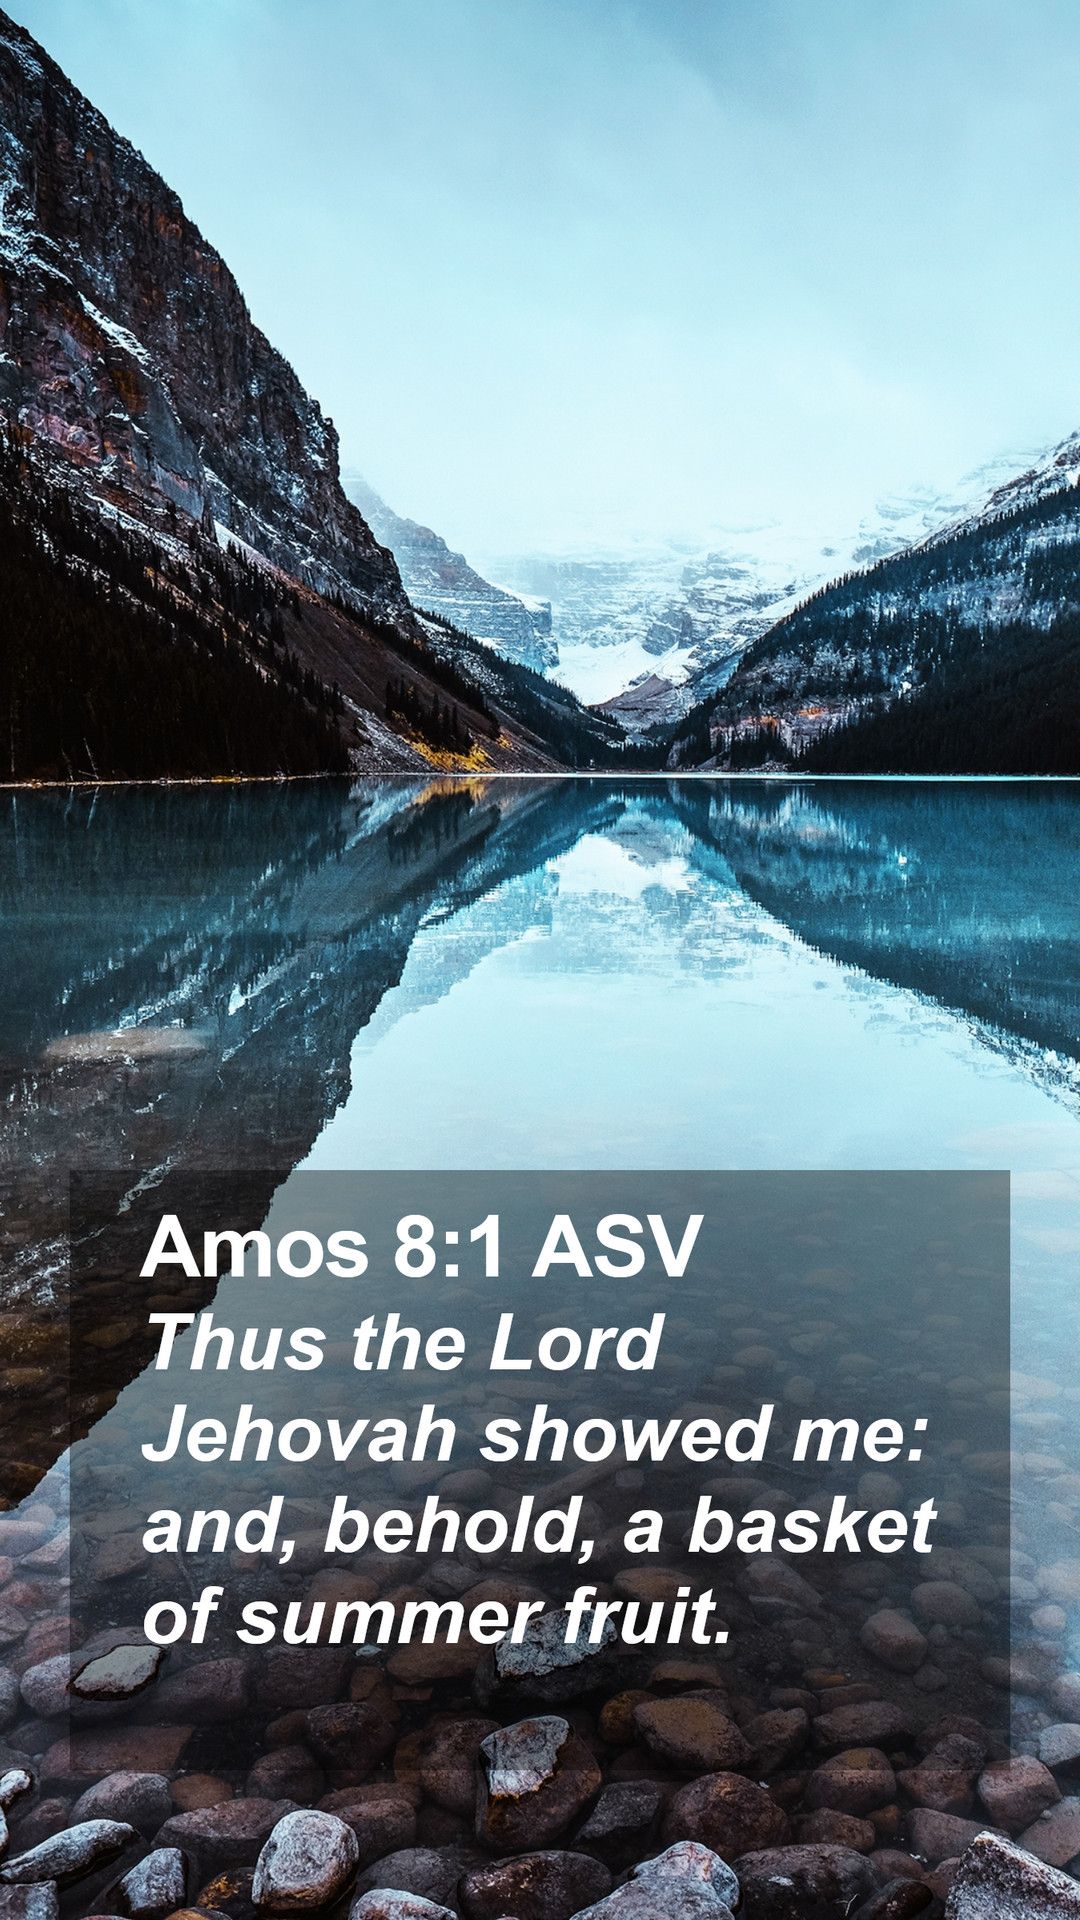 Amos 8:1 ASV Mobile Phone Wallpaper the Lord Jehovah showed me: and, behold, a